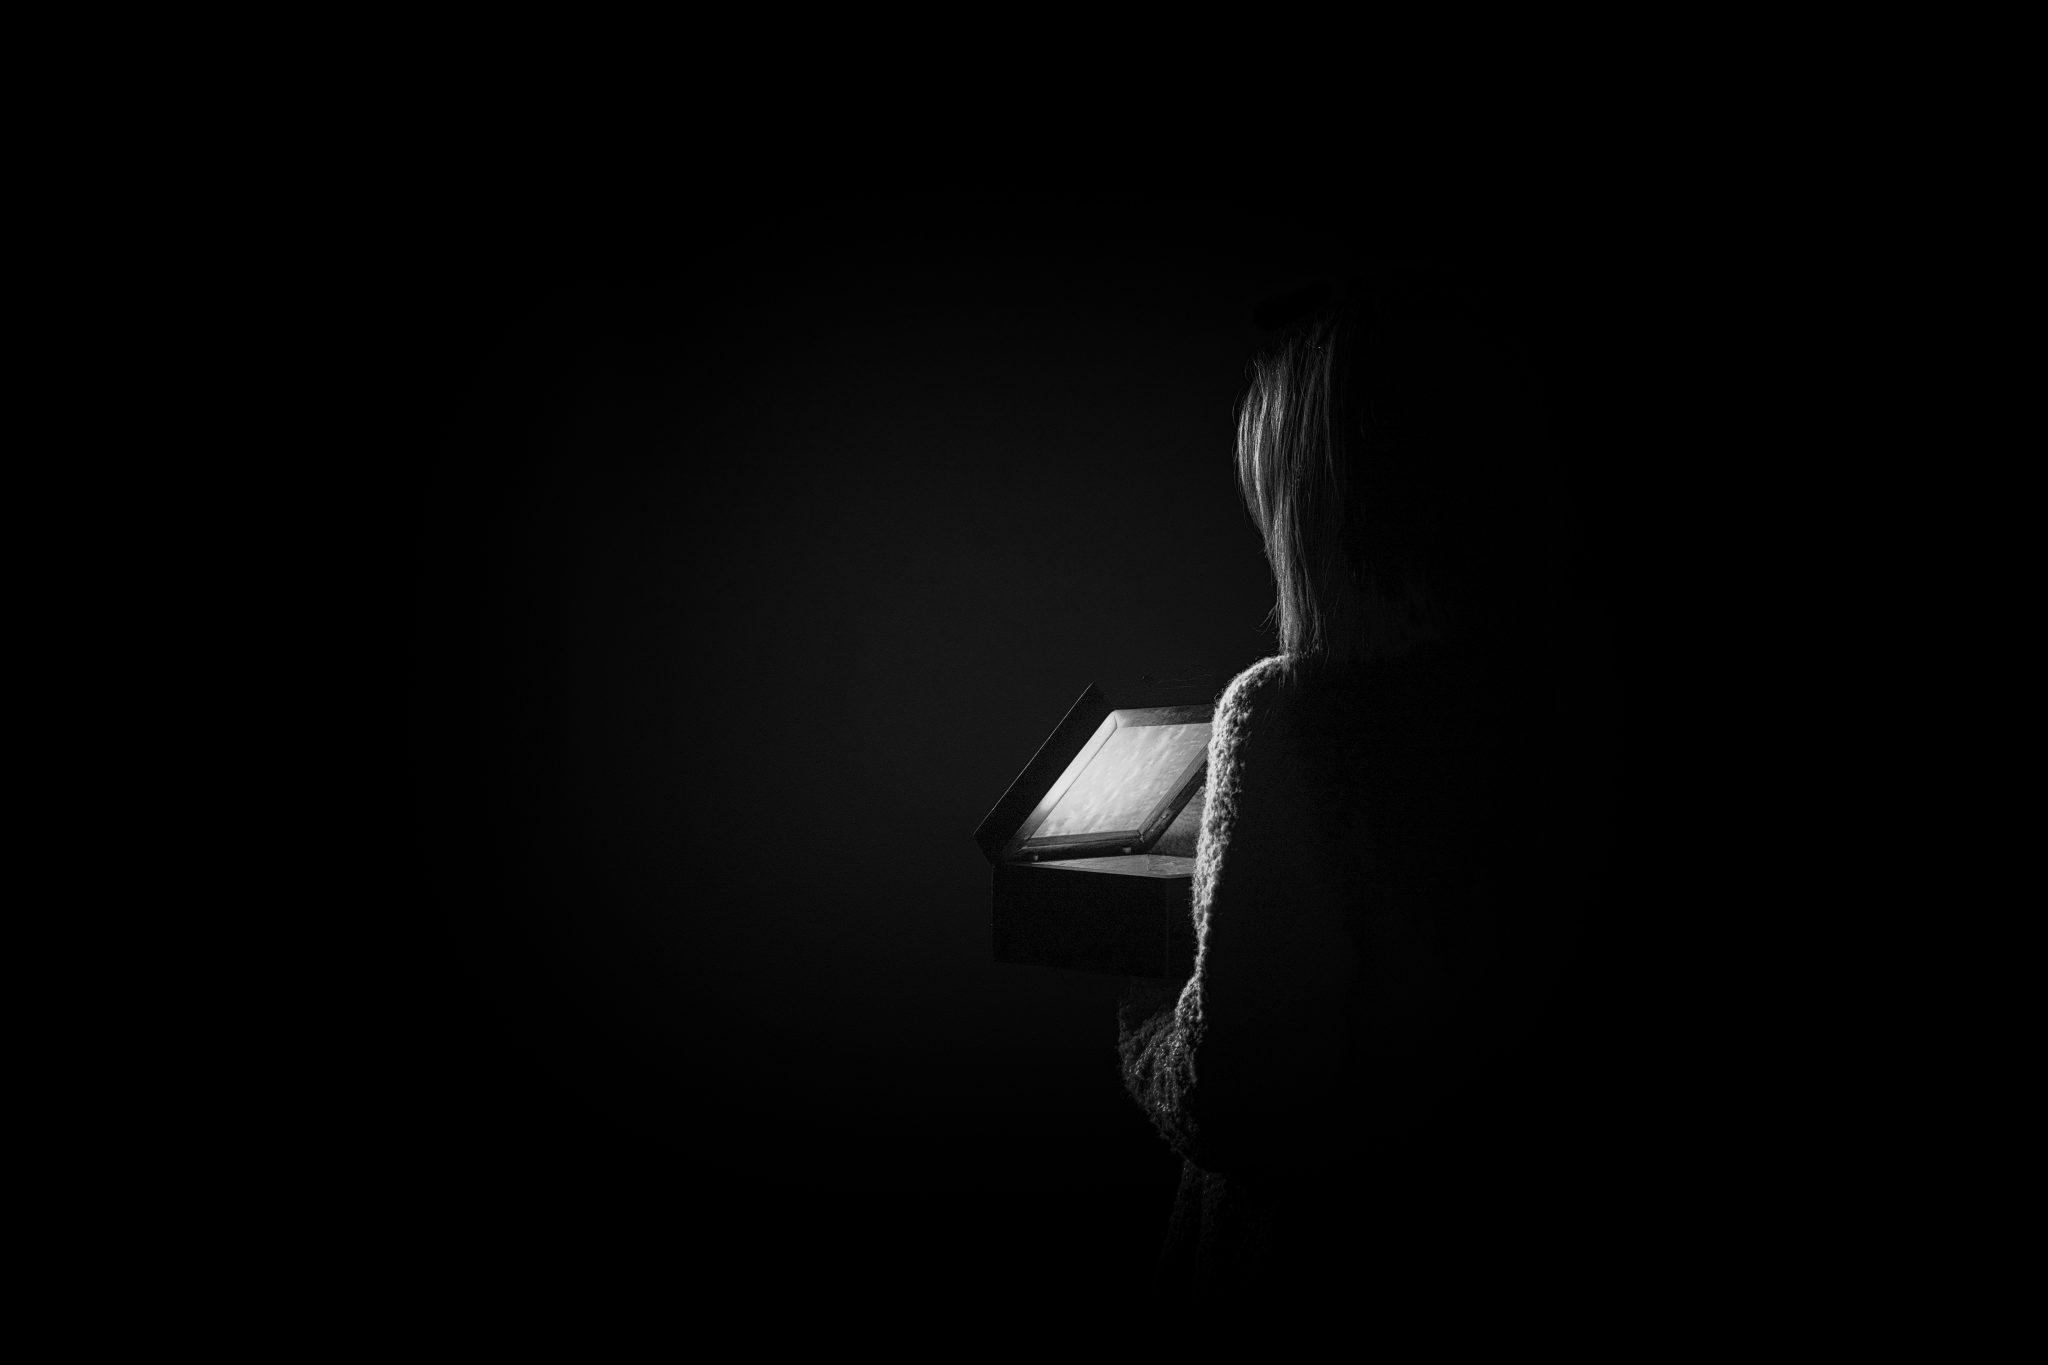 Black and white photo of a woman, from behind, looking into a box with a glowing light inside.